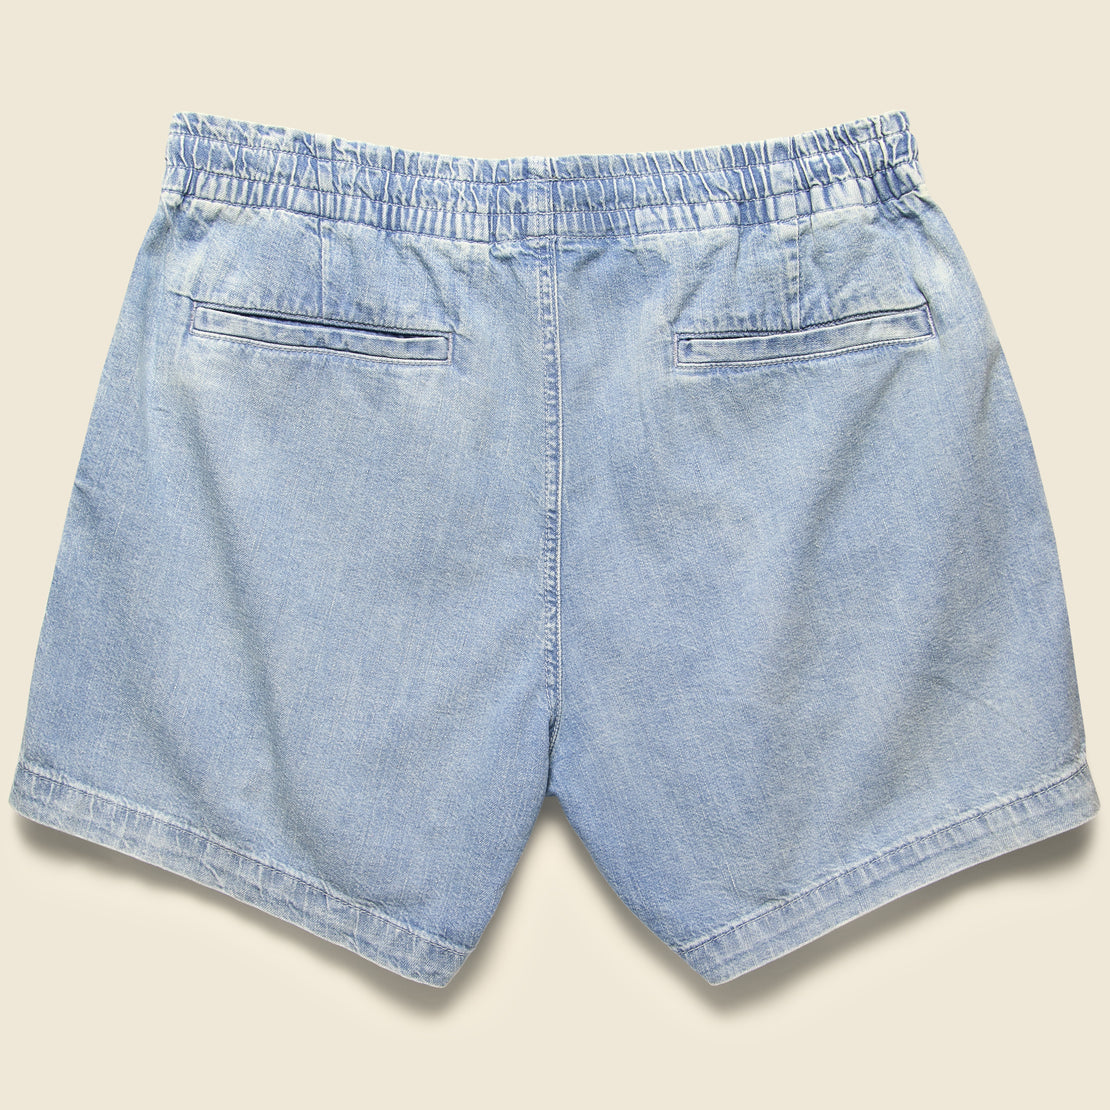 Denim Pull-On Short - Light Wash - Polo Ralph Lauren - STAG Provisions - Shorts - Lounge